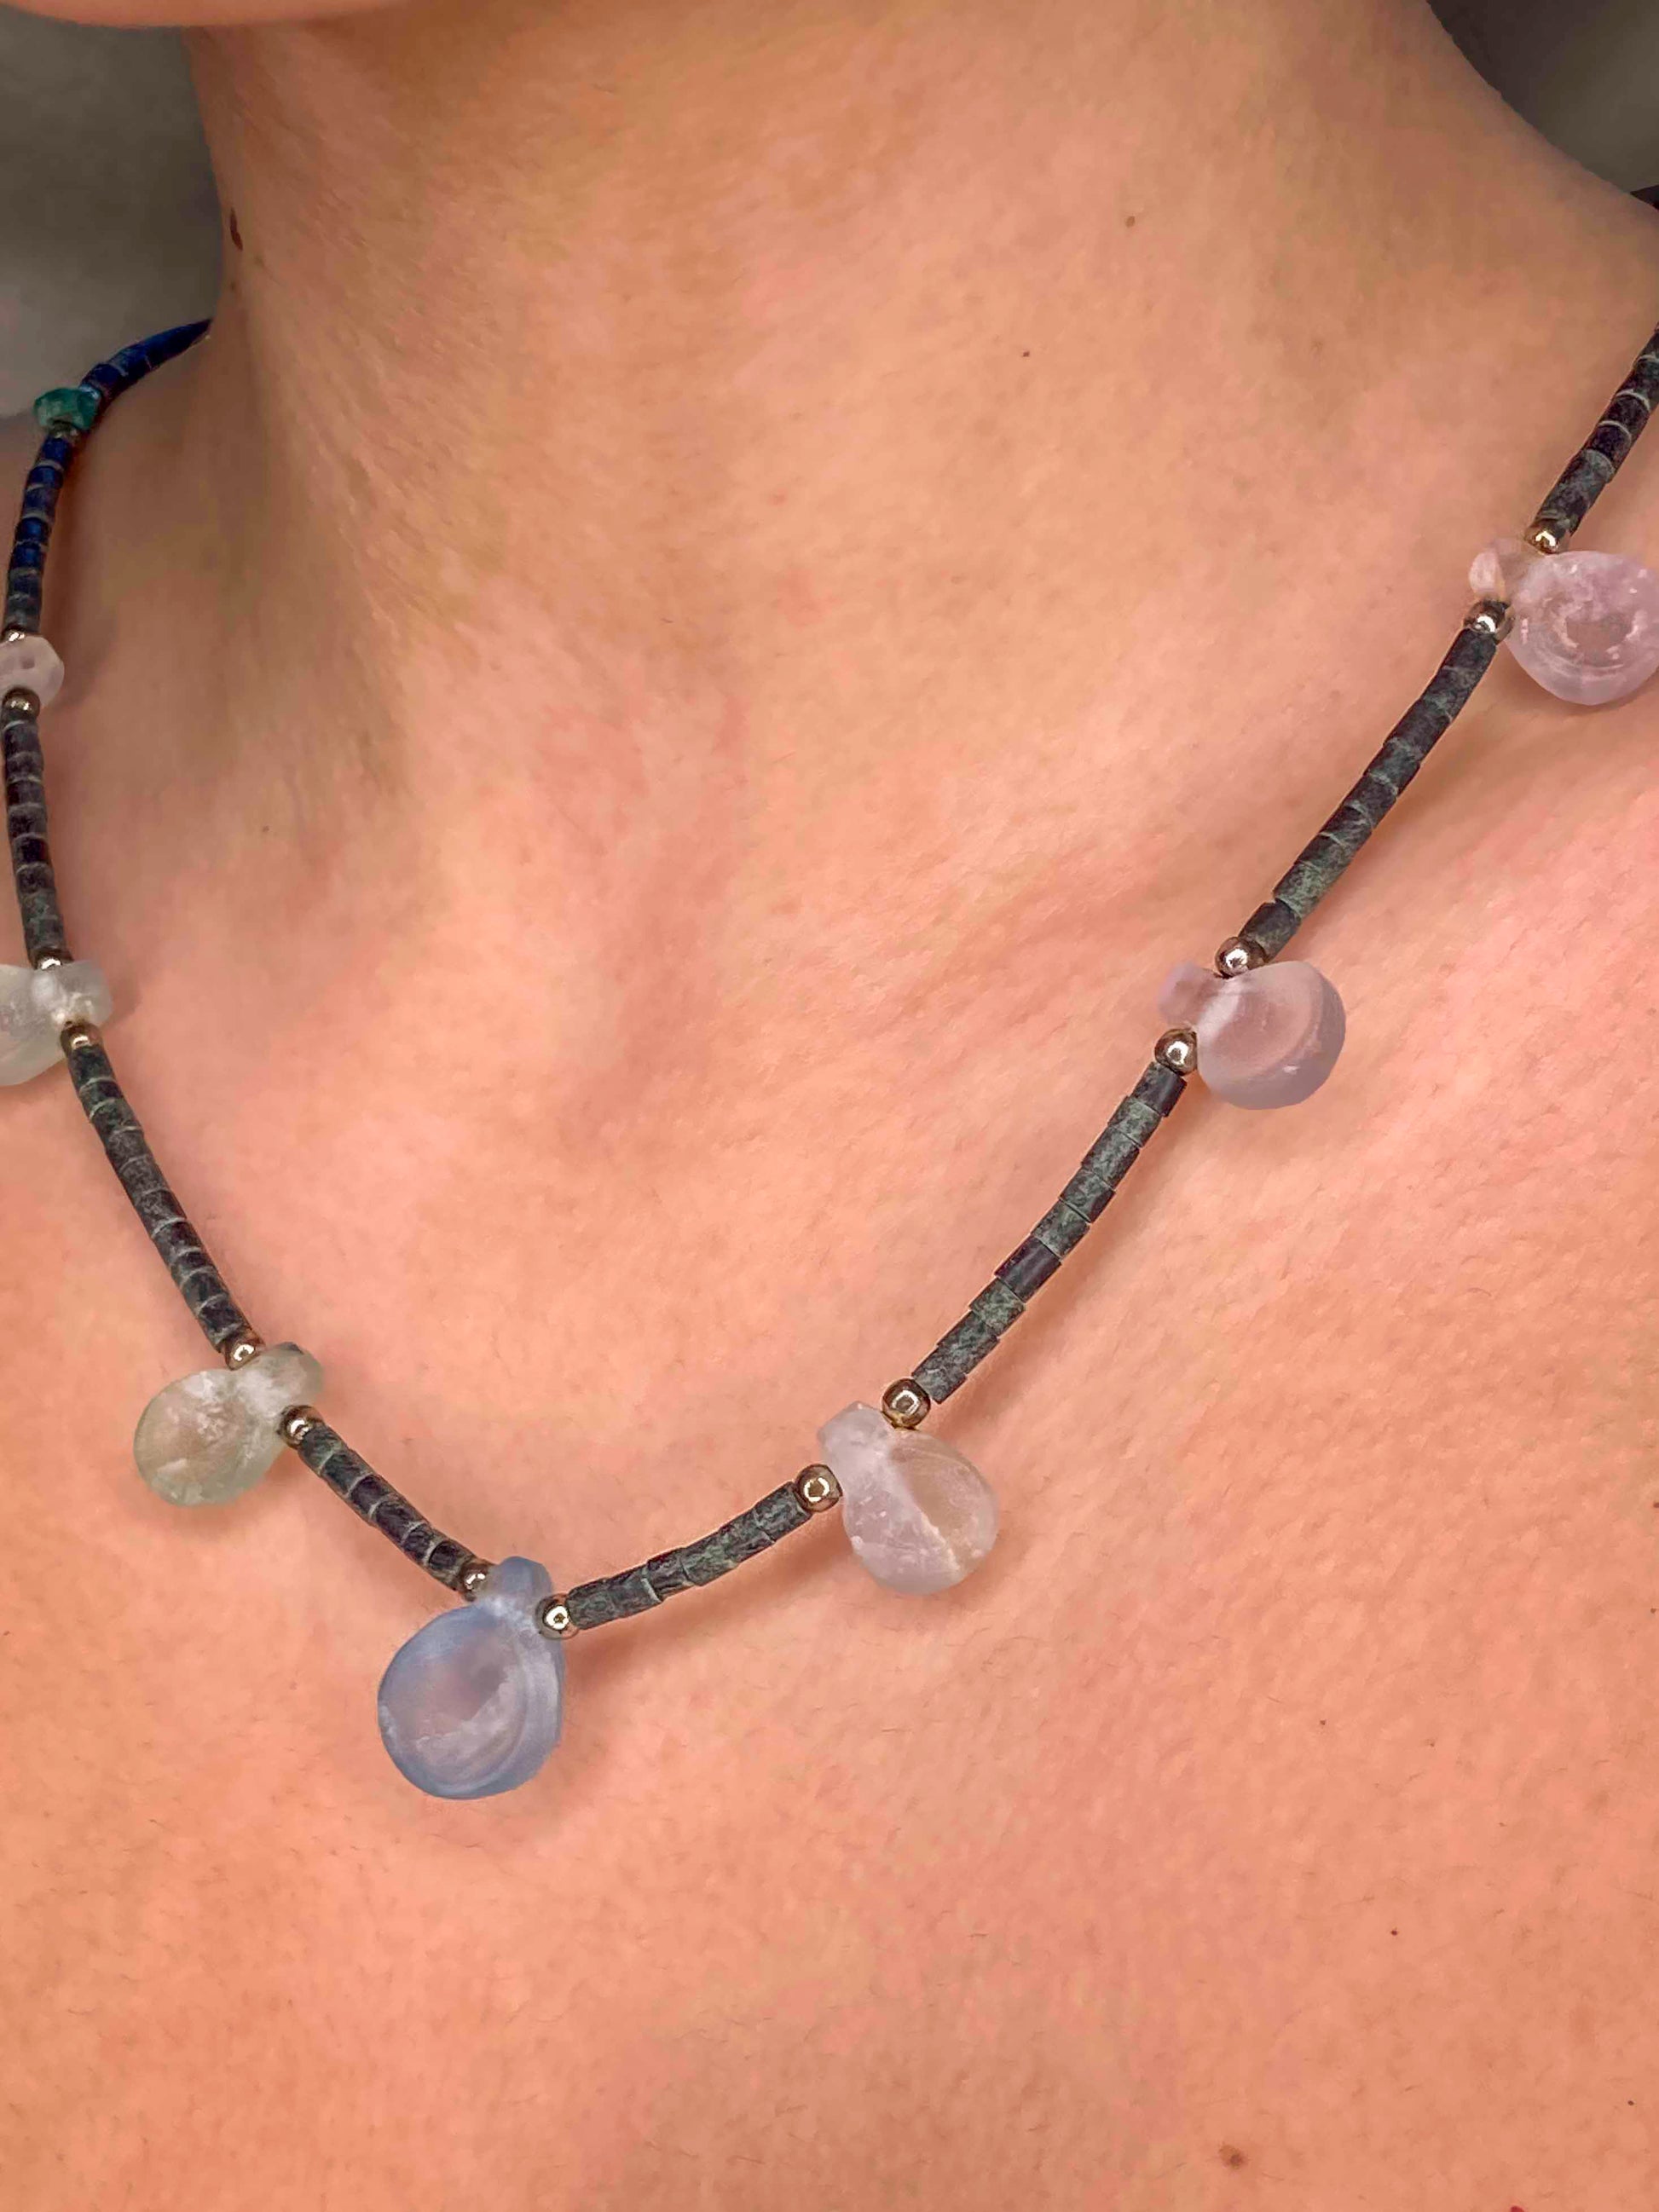 Handcrafted beaded necklace made using carved crystal quartz, turquoise, silver balls, and granite cylinder beads.